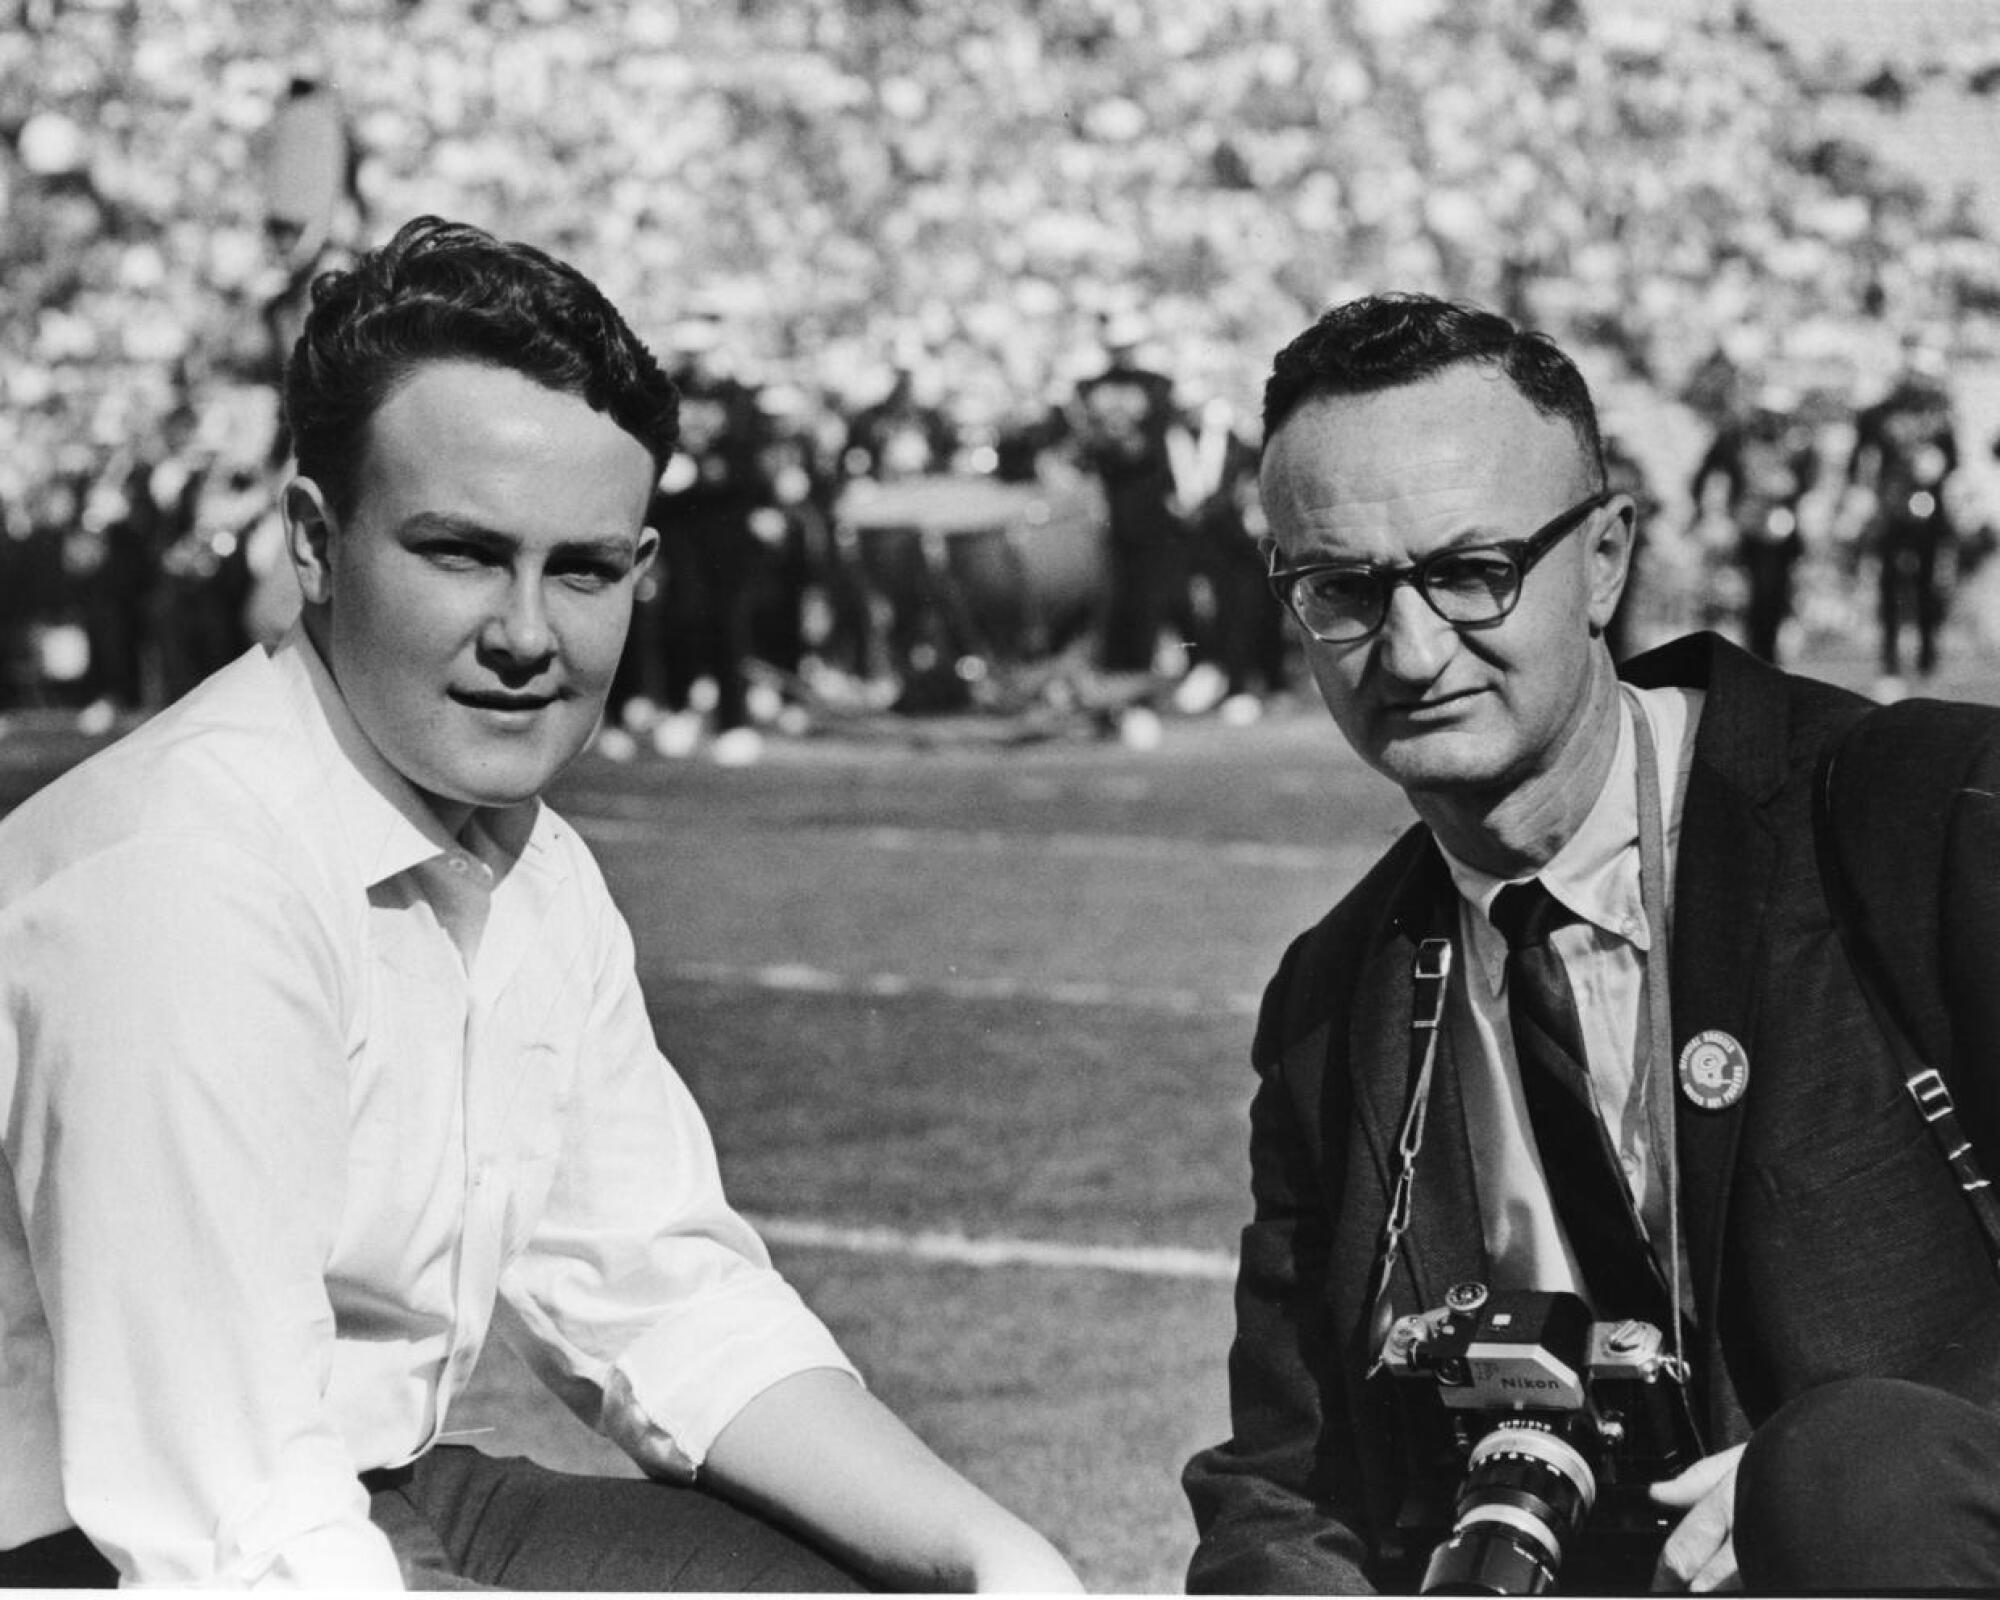 Photographer John Biever photographed his first Super Bowl with his father Vernon, who was the Green Bay Packers team 